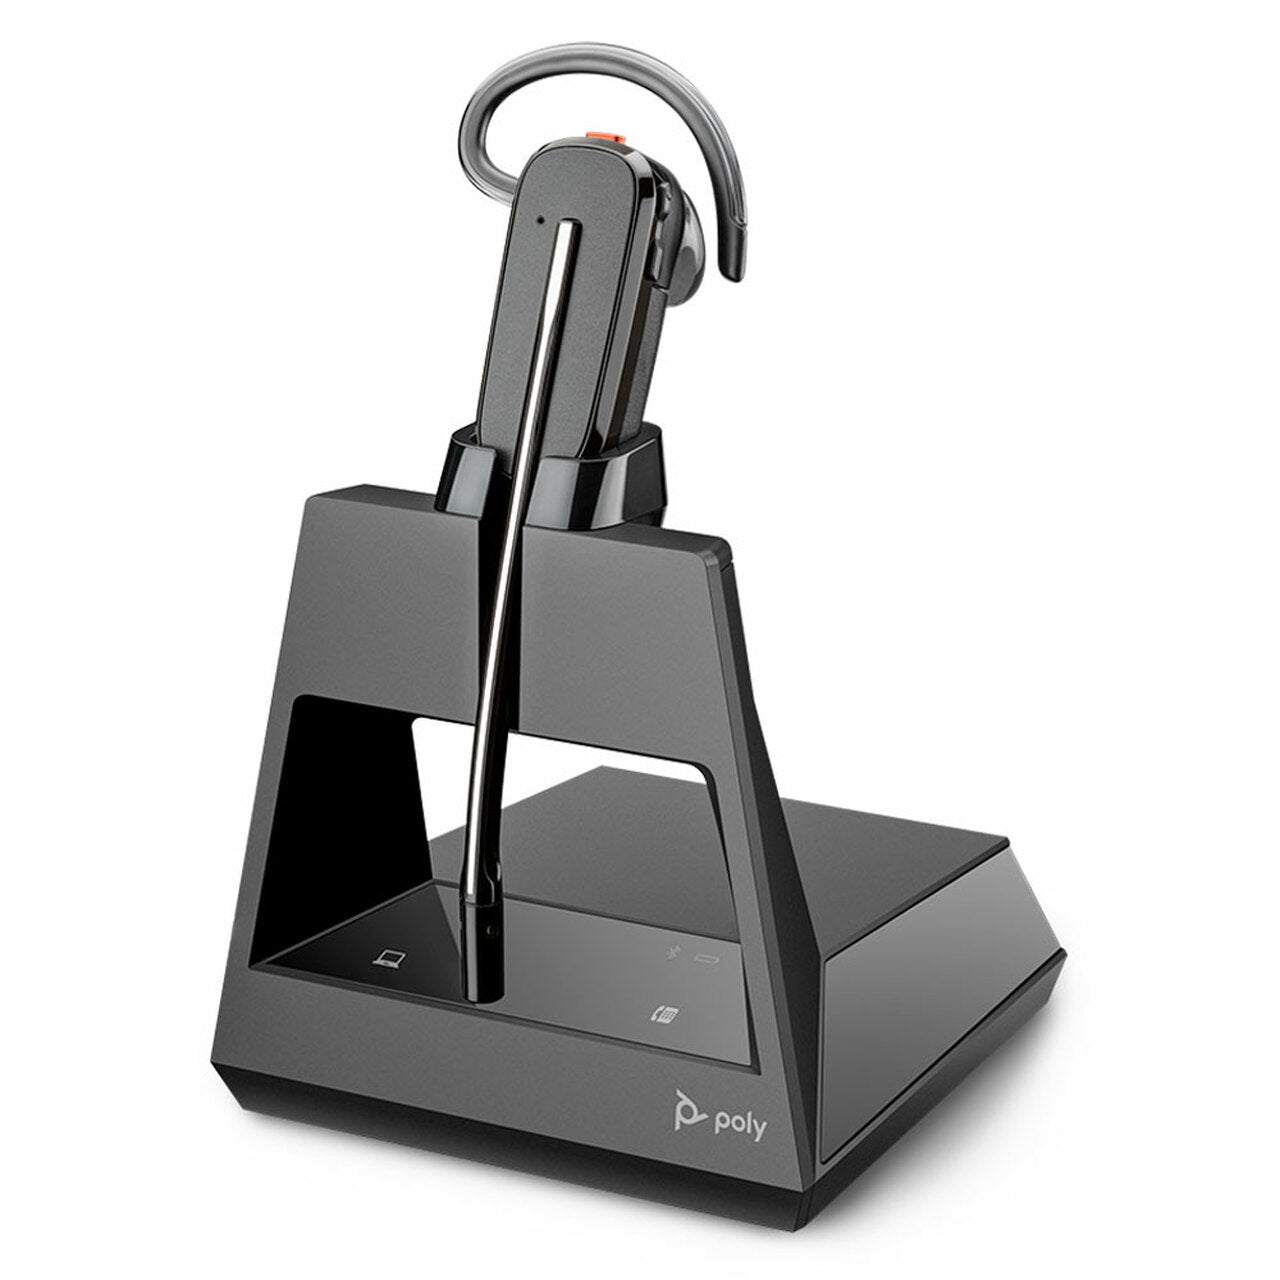 Poly Voyager 4245 Office Wireless Bluetooth Headset System